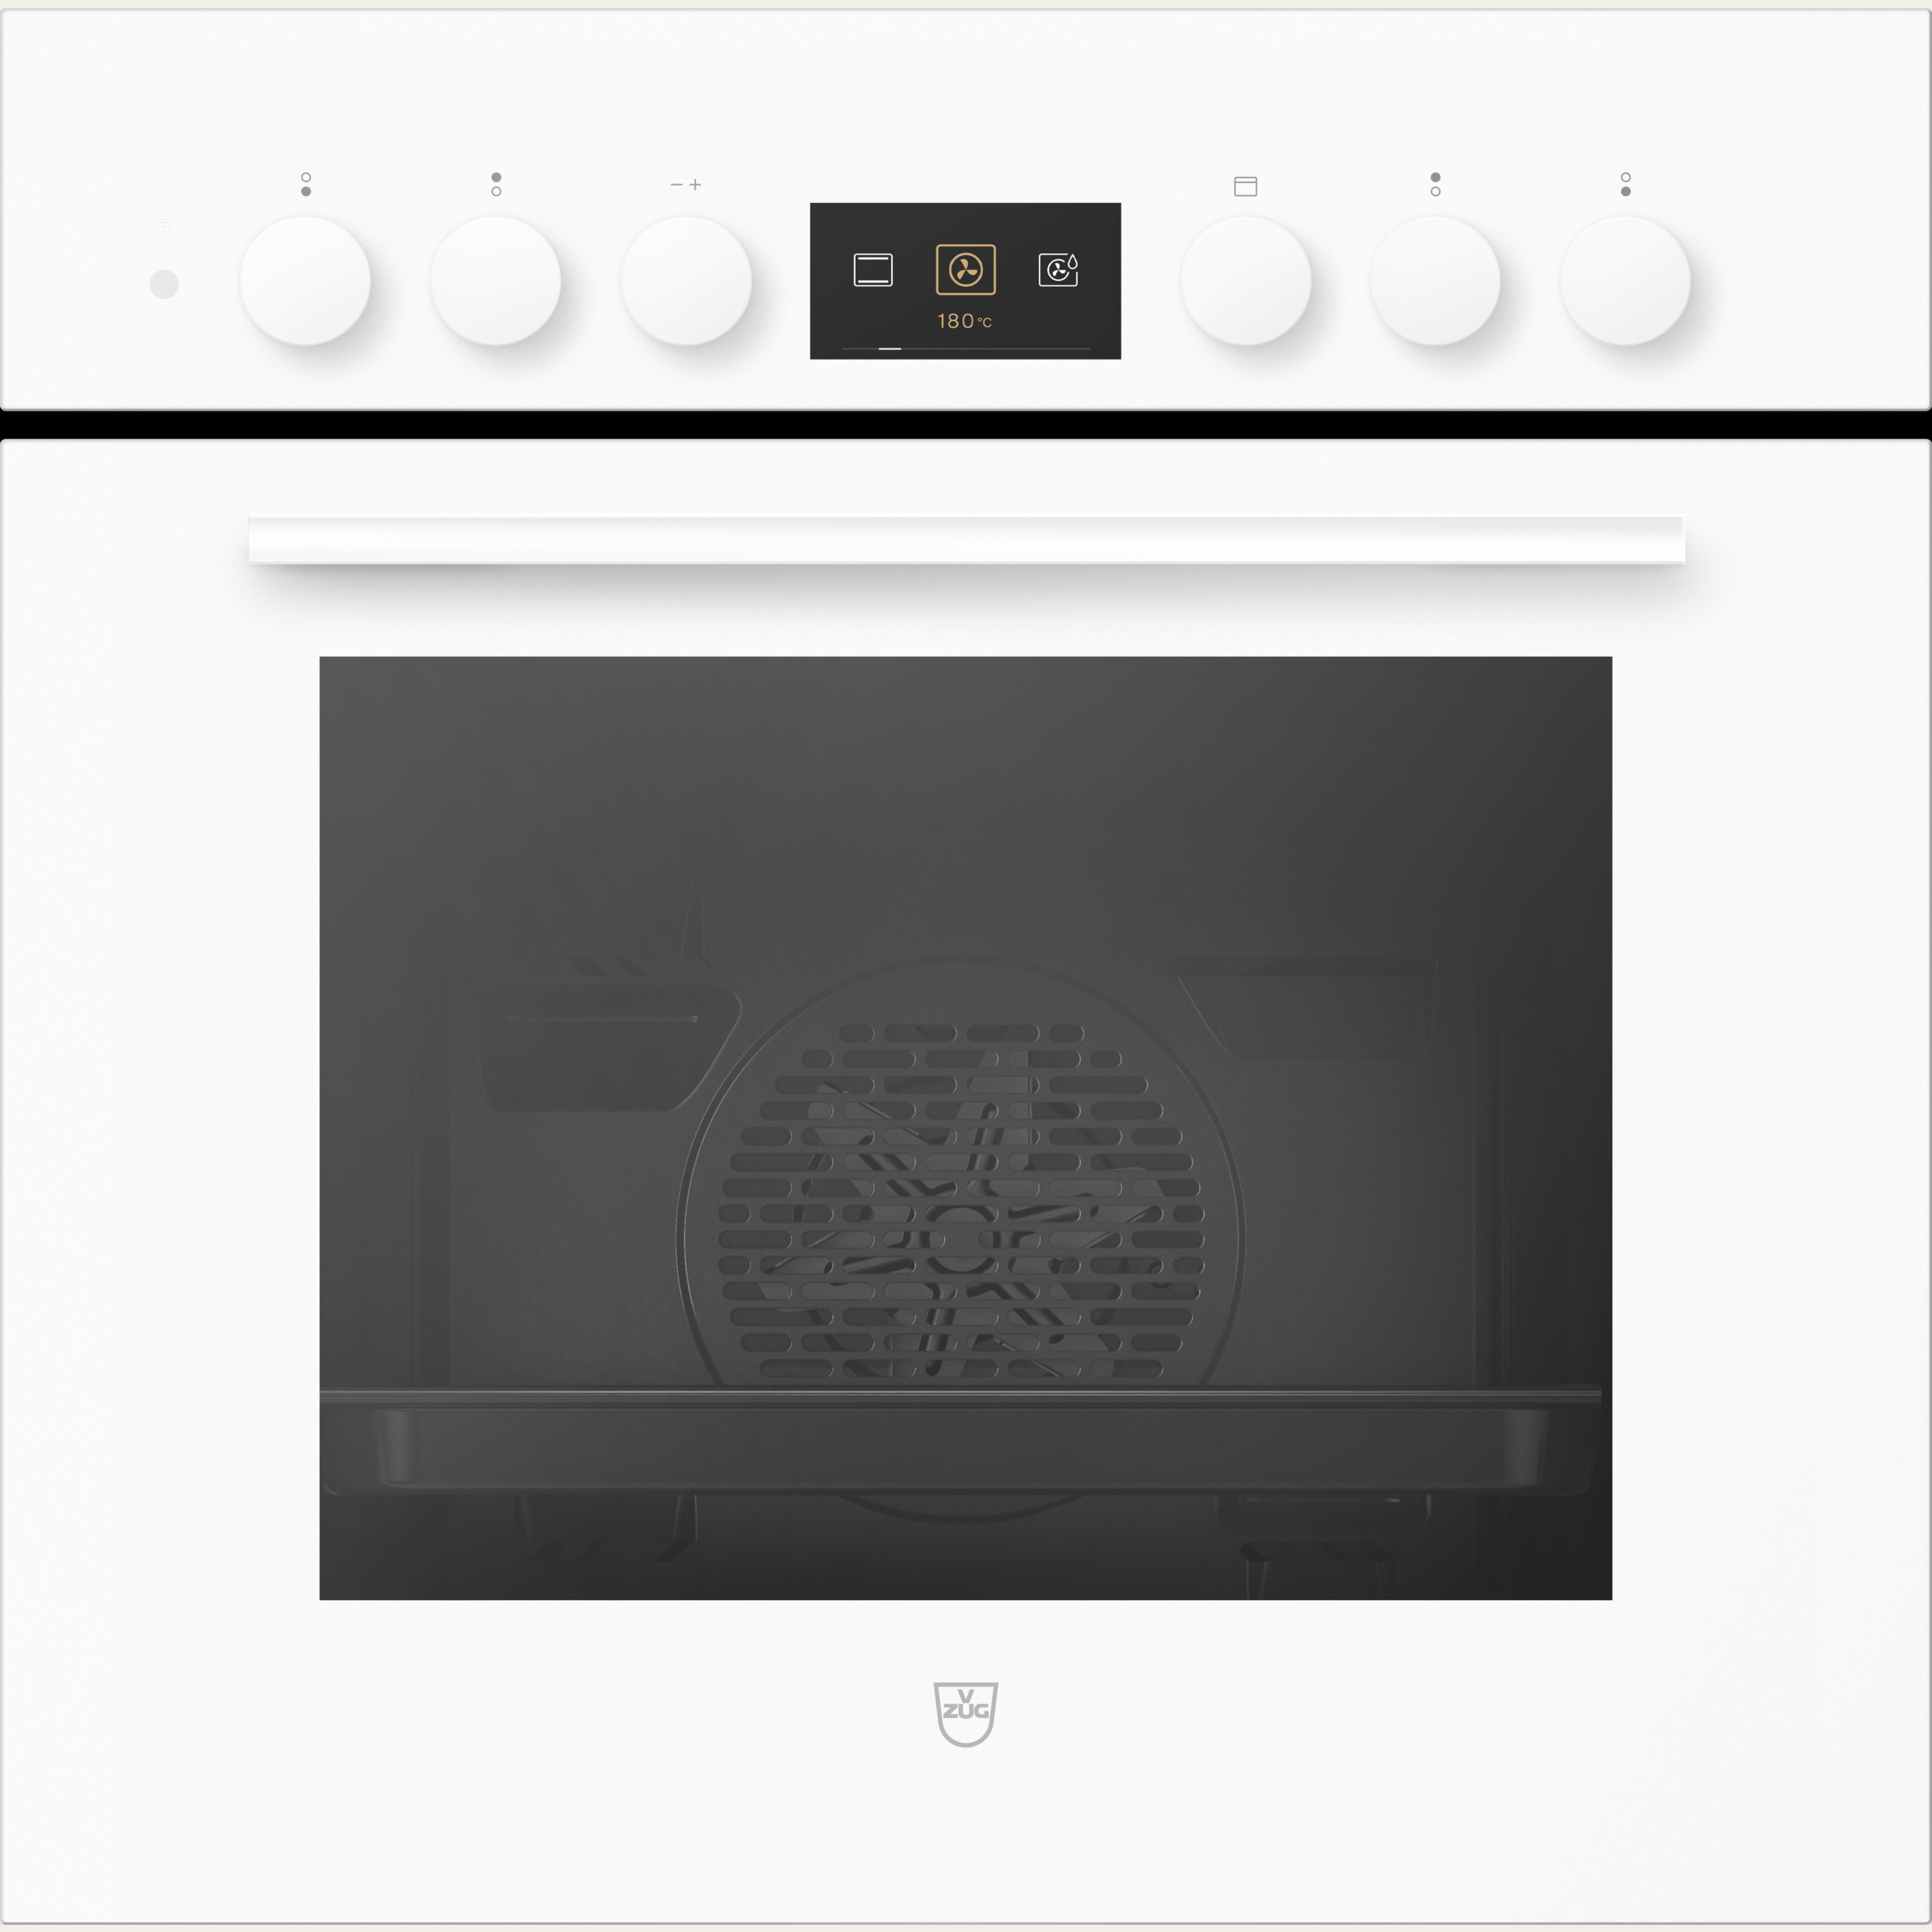 V-ZUG Cooker Combair V600 6UH, Standard width: 60 cm, Standard height: 60 cm, White with glass, Handle: white, dial, V-ZUG-Home, TopClean, Number of controllable cooking zones: 4, 400V